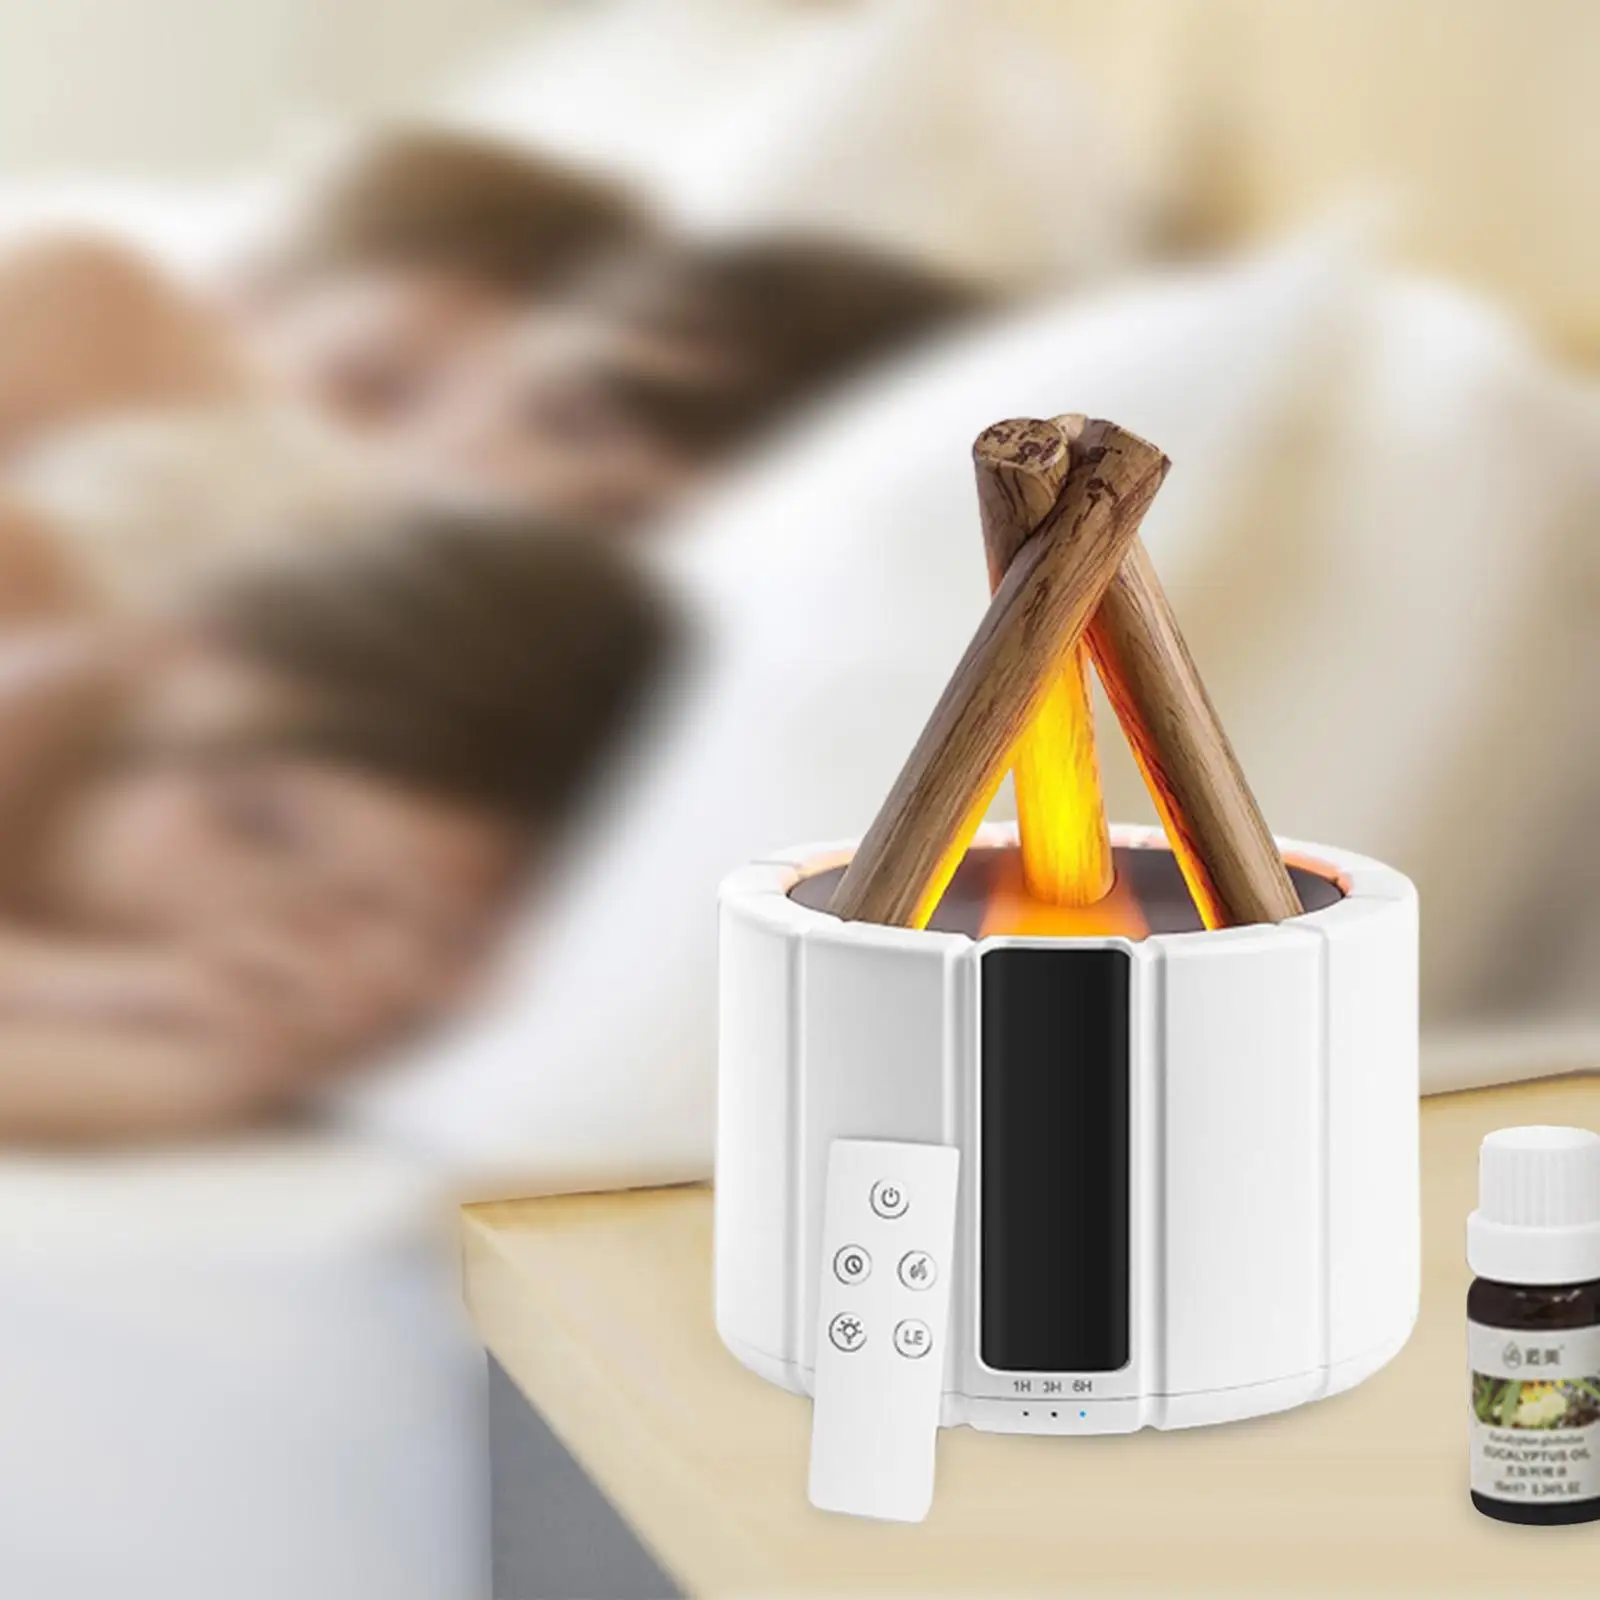 Flame Aroma Diffuser Gift Simulated Fireplace 250ml Mist Sprayer Air Humidifier for Home Room SPA Gym Study Office Decor Desktop